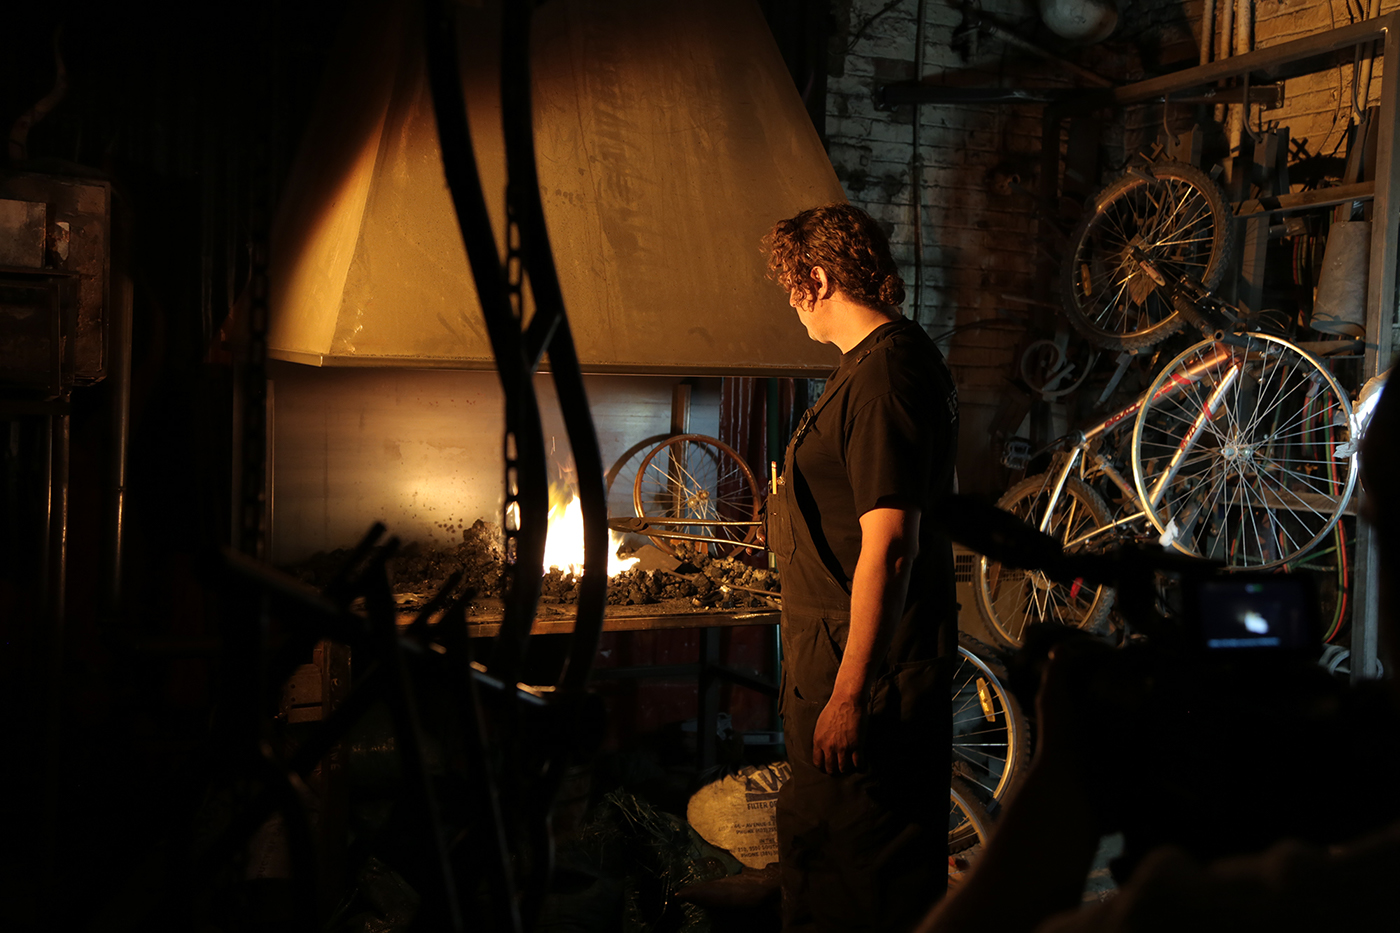 iBike Behind the Scene raw Blacksmith fire forge Forge Urbaine fixed gear